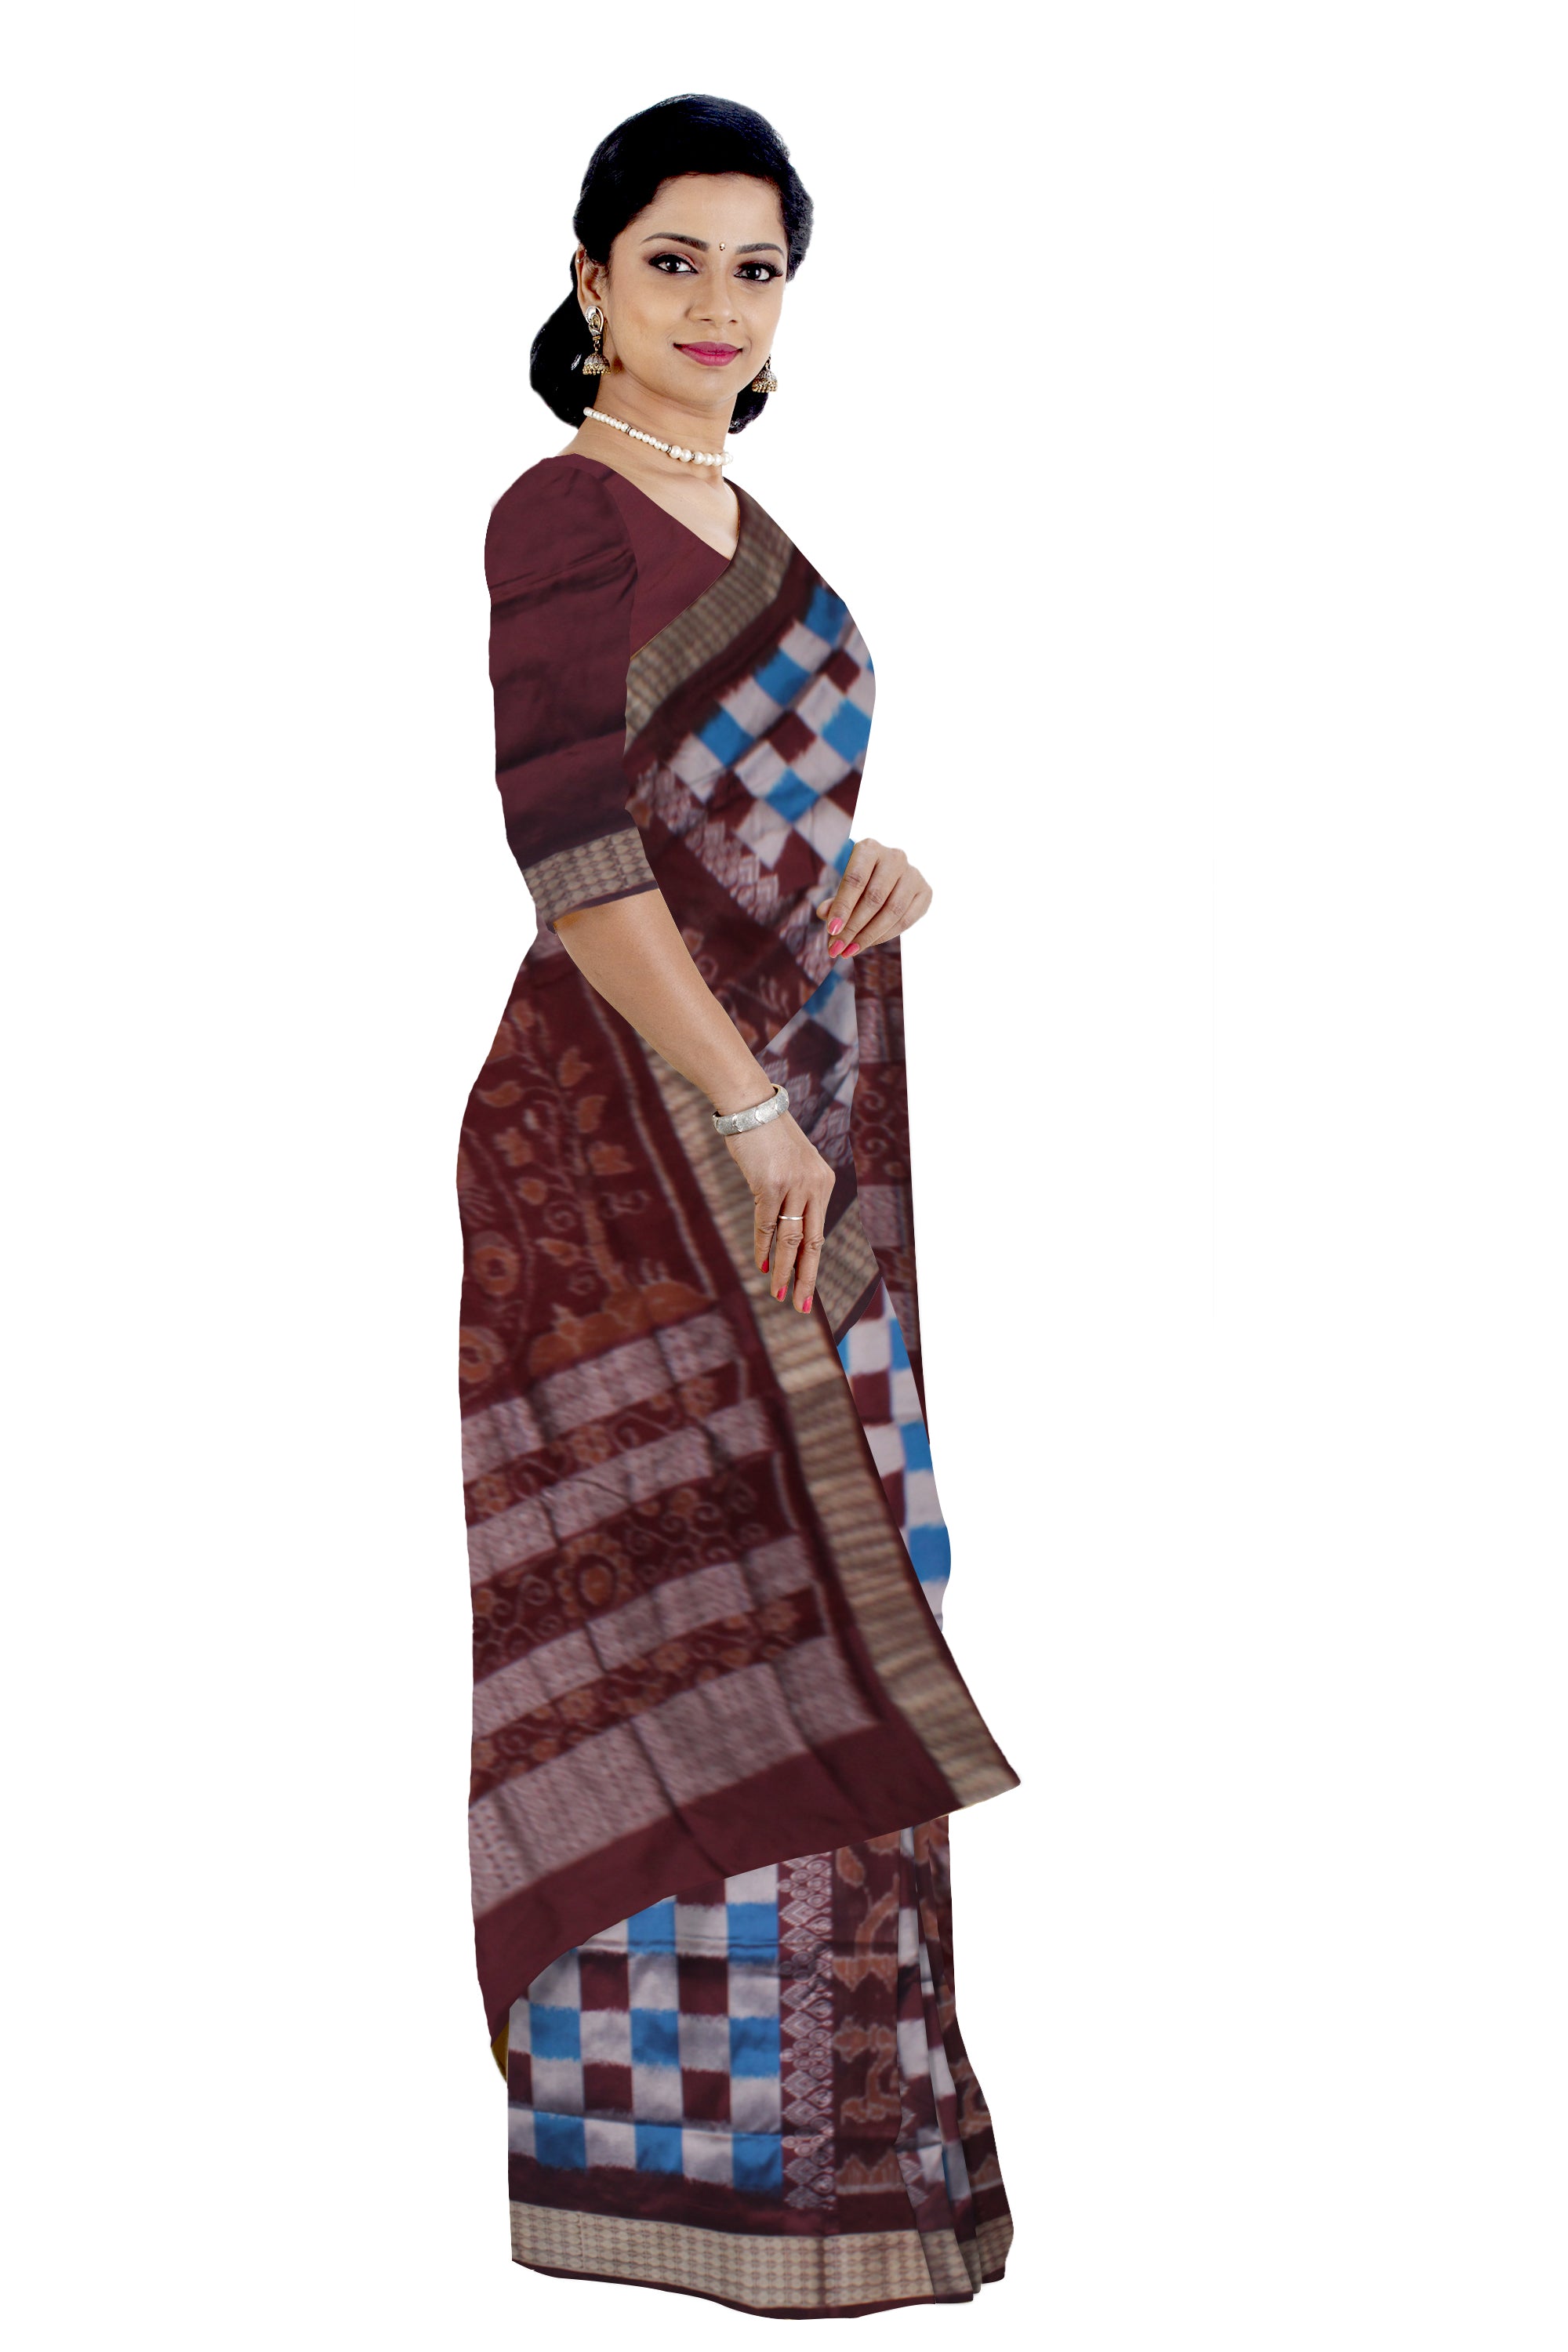 PASAPALI WITH PEACOCK PRINT BOMKEI PATA SAREE IS SLY AND COFFEE COLOR ,COMES WITH MATCHING BLOUSE PIECE. - Koshali Arts & Crafts Enterprise